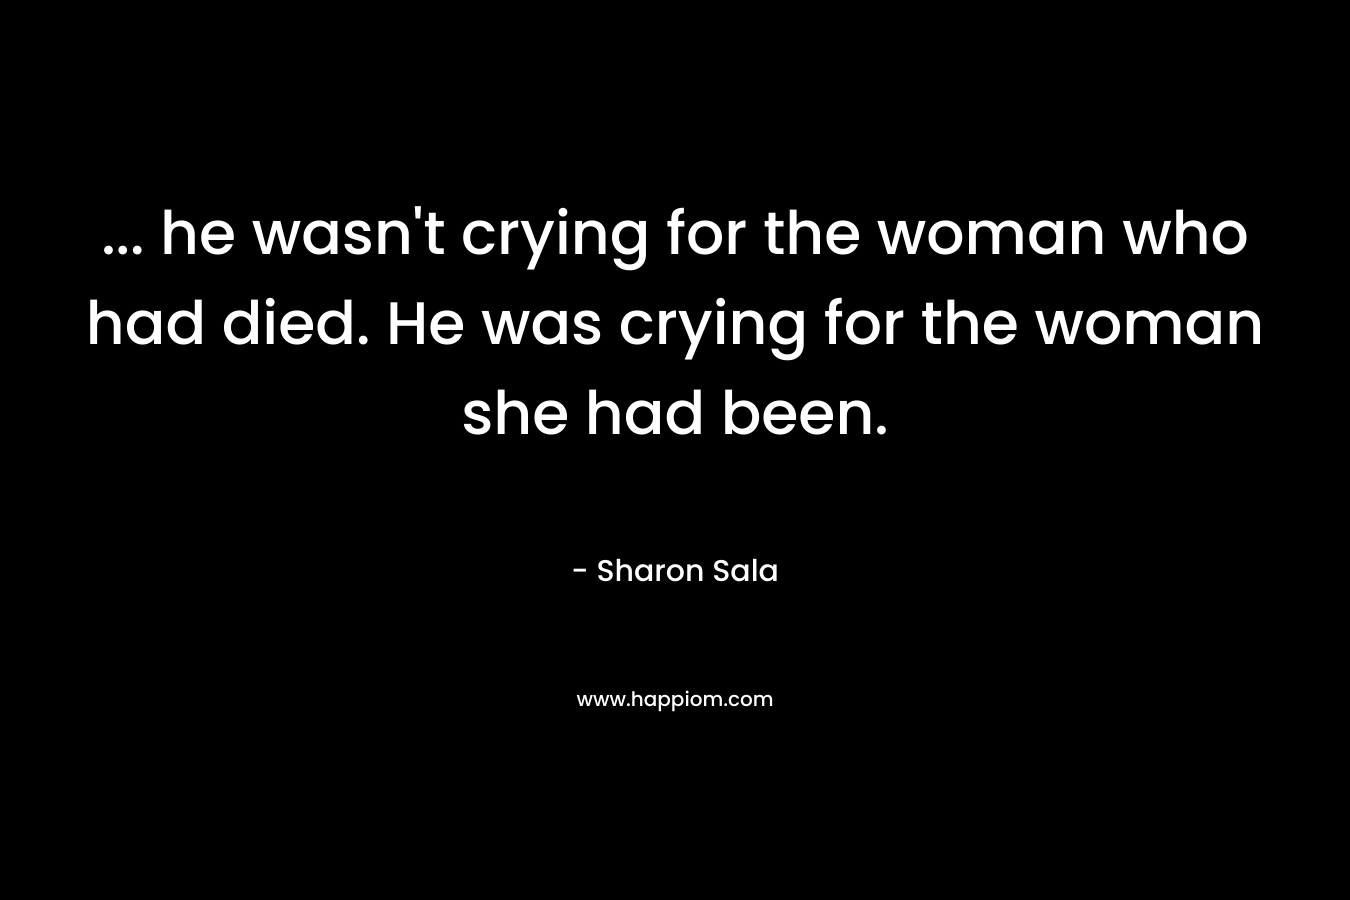 ... he wasn't crying for the woman who had died. He was crying for the woman she had been.